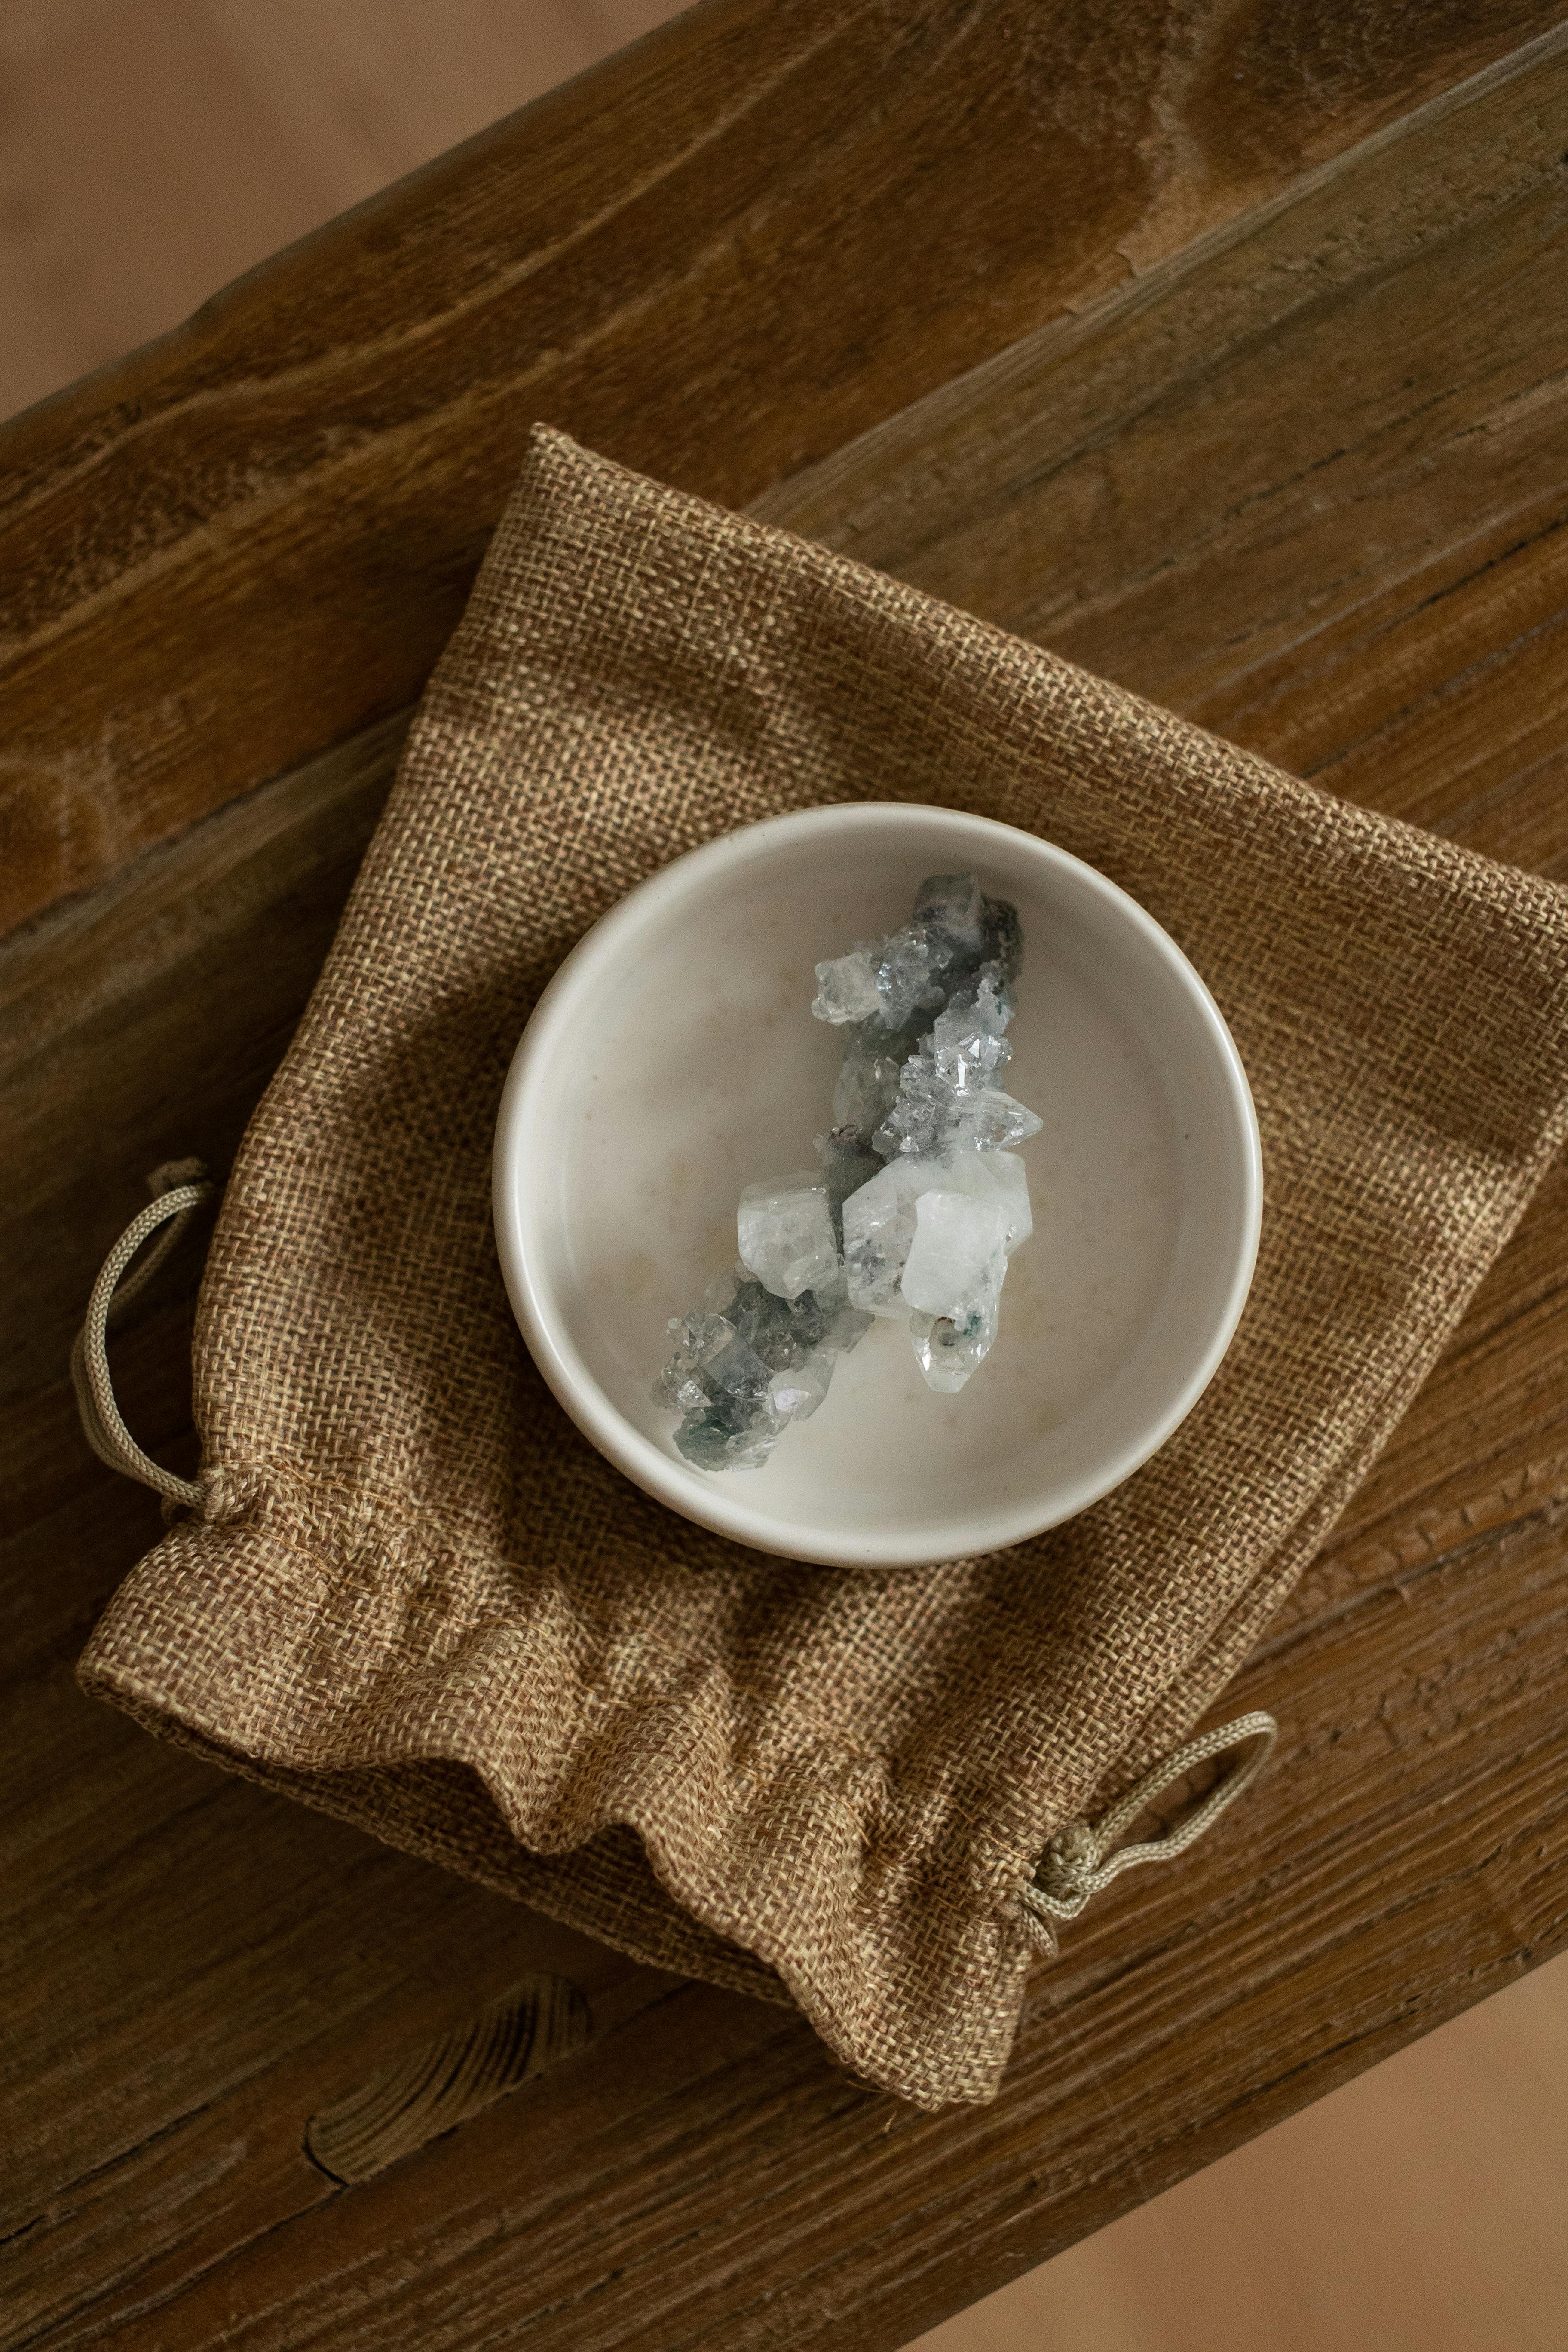 crystal in a cup on a sack